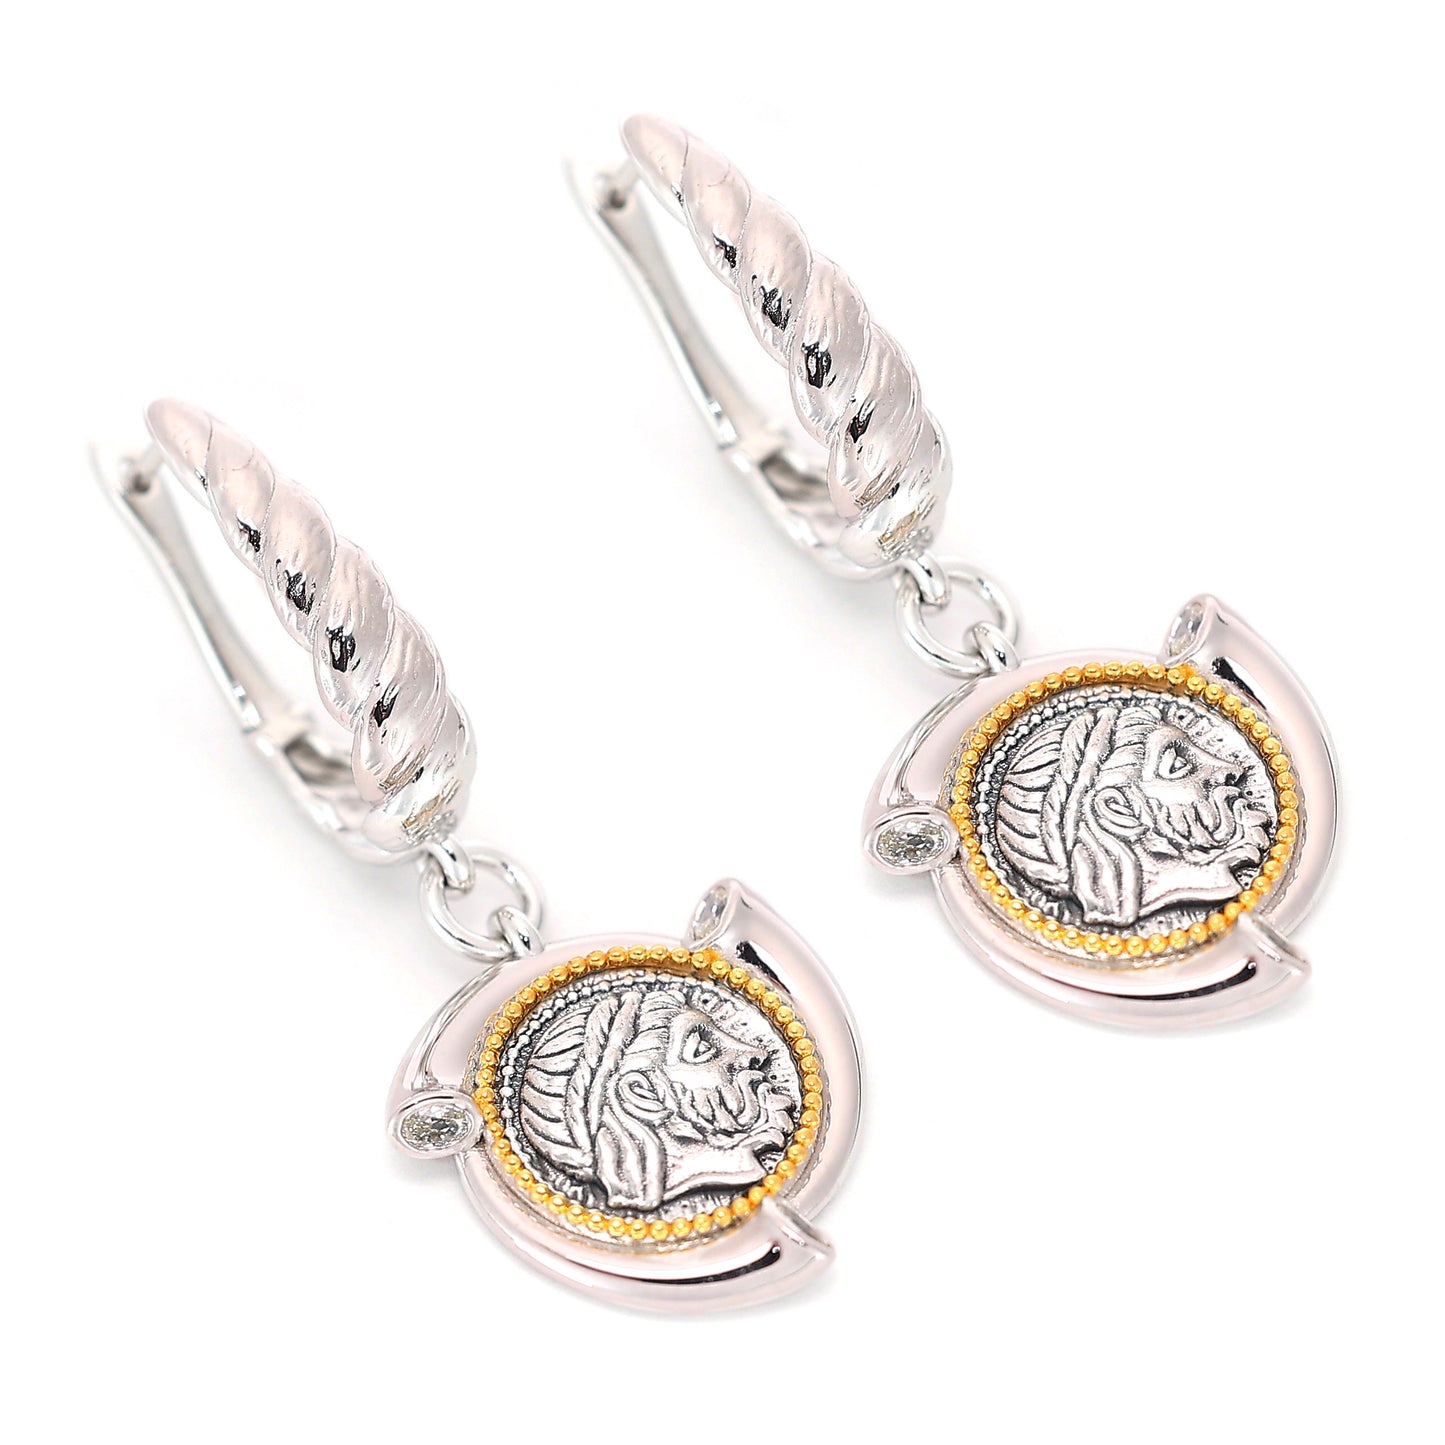 Micro-setting two-sided ancient coin the king of the gods Zeus earrings, sterling silver